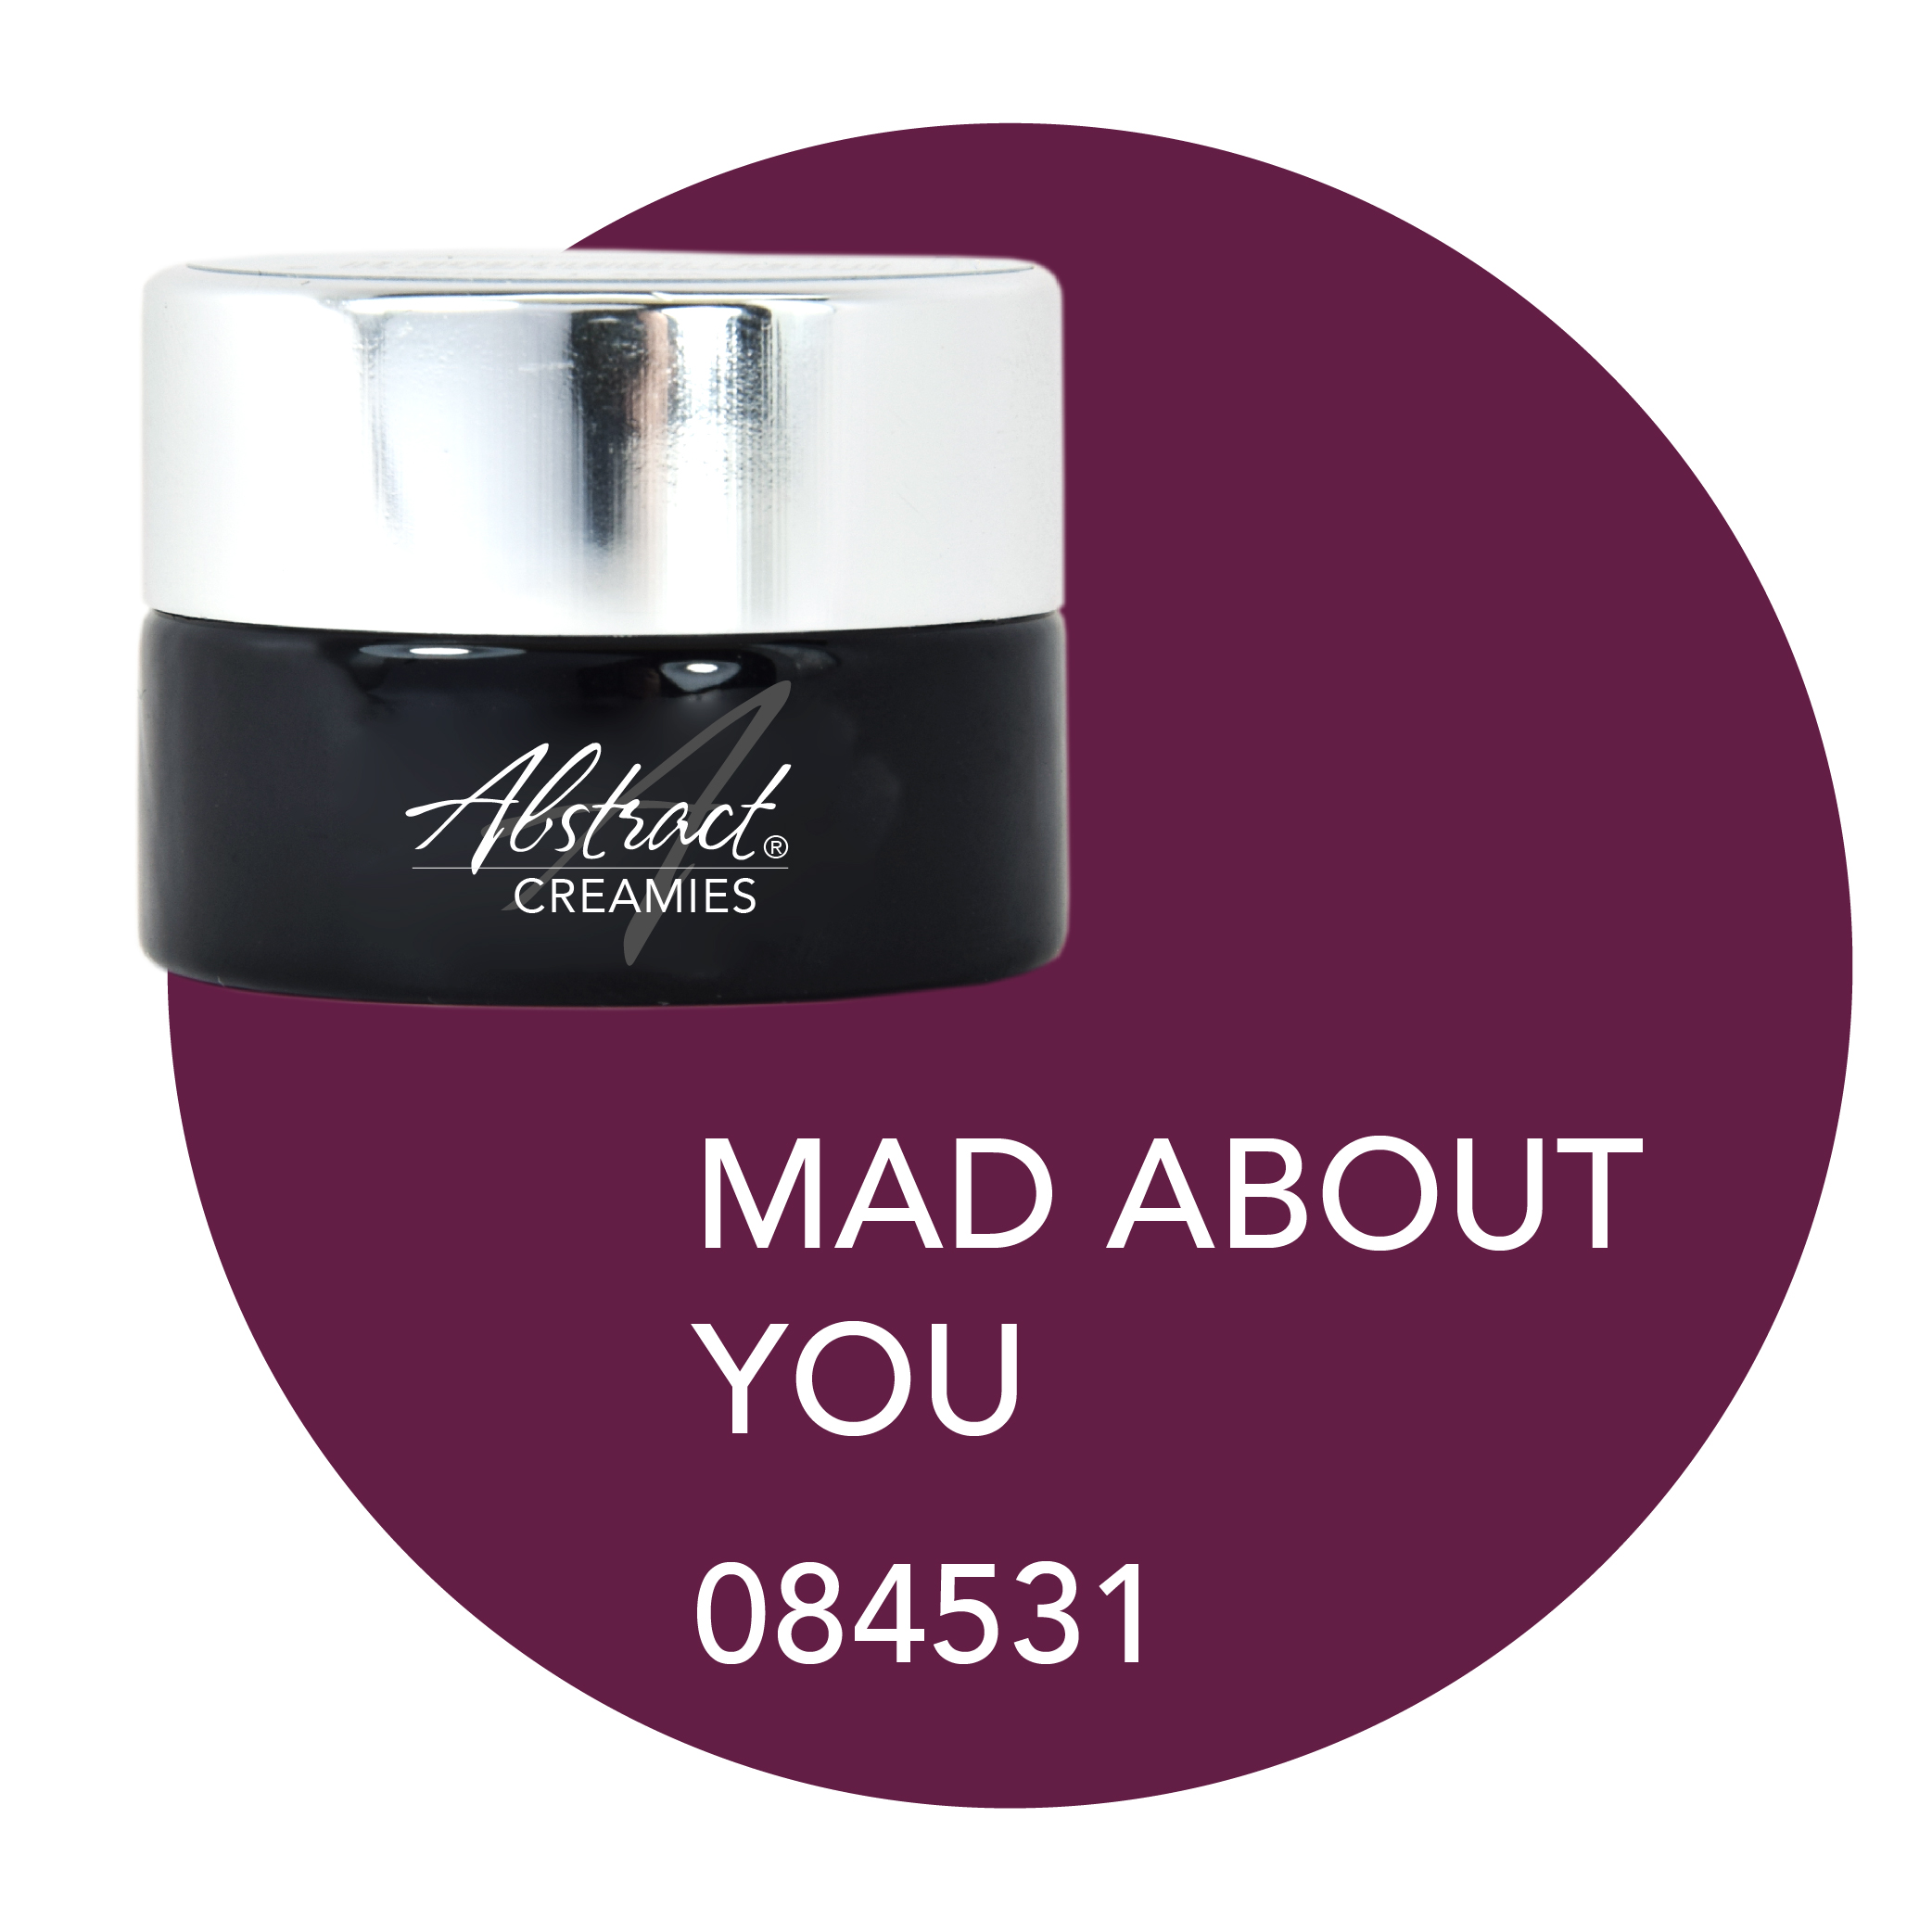 Mad About You 5ml Creamies (Lipstick), Abstract | 084531